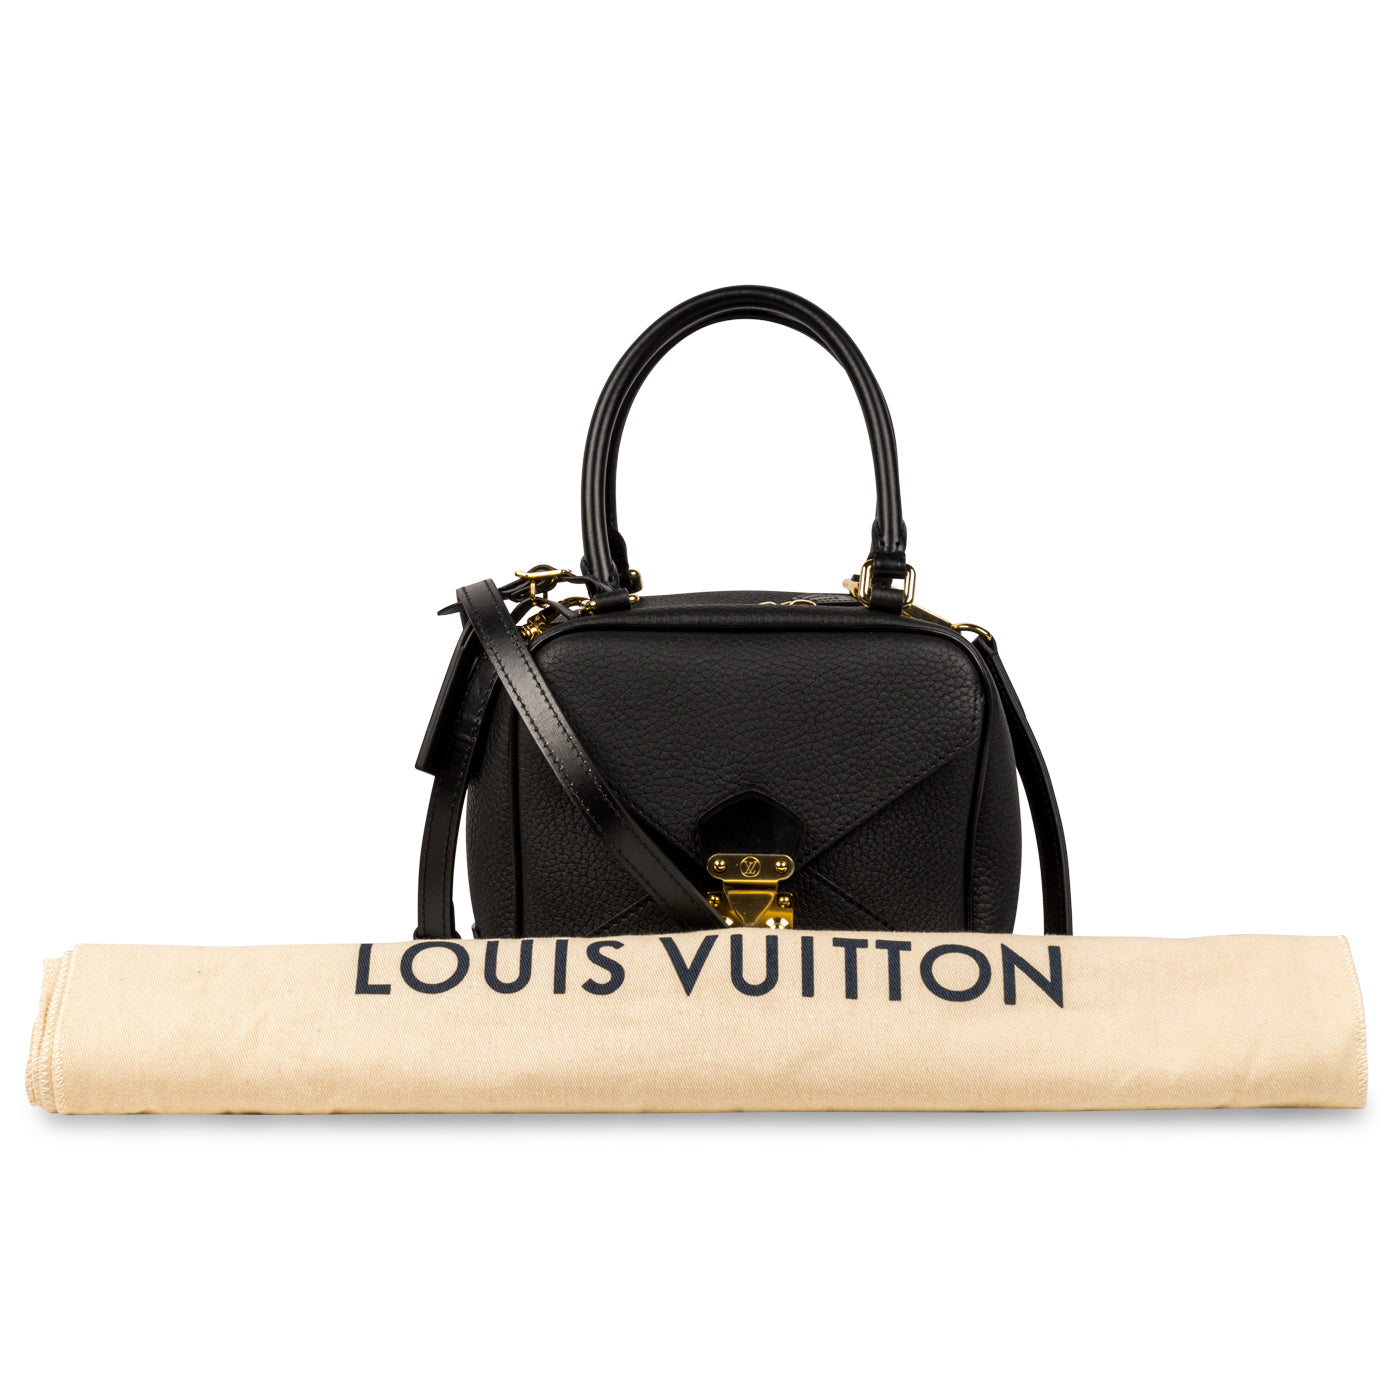 Louis Vuitton Limited Edition Black Embossed Leather Speedy Cube